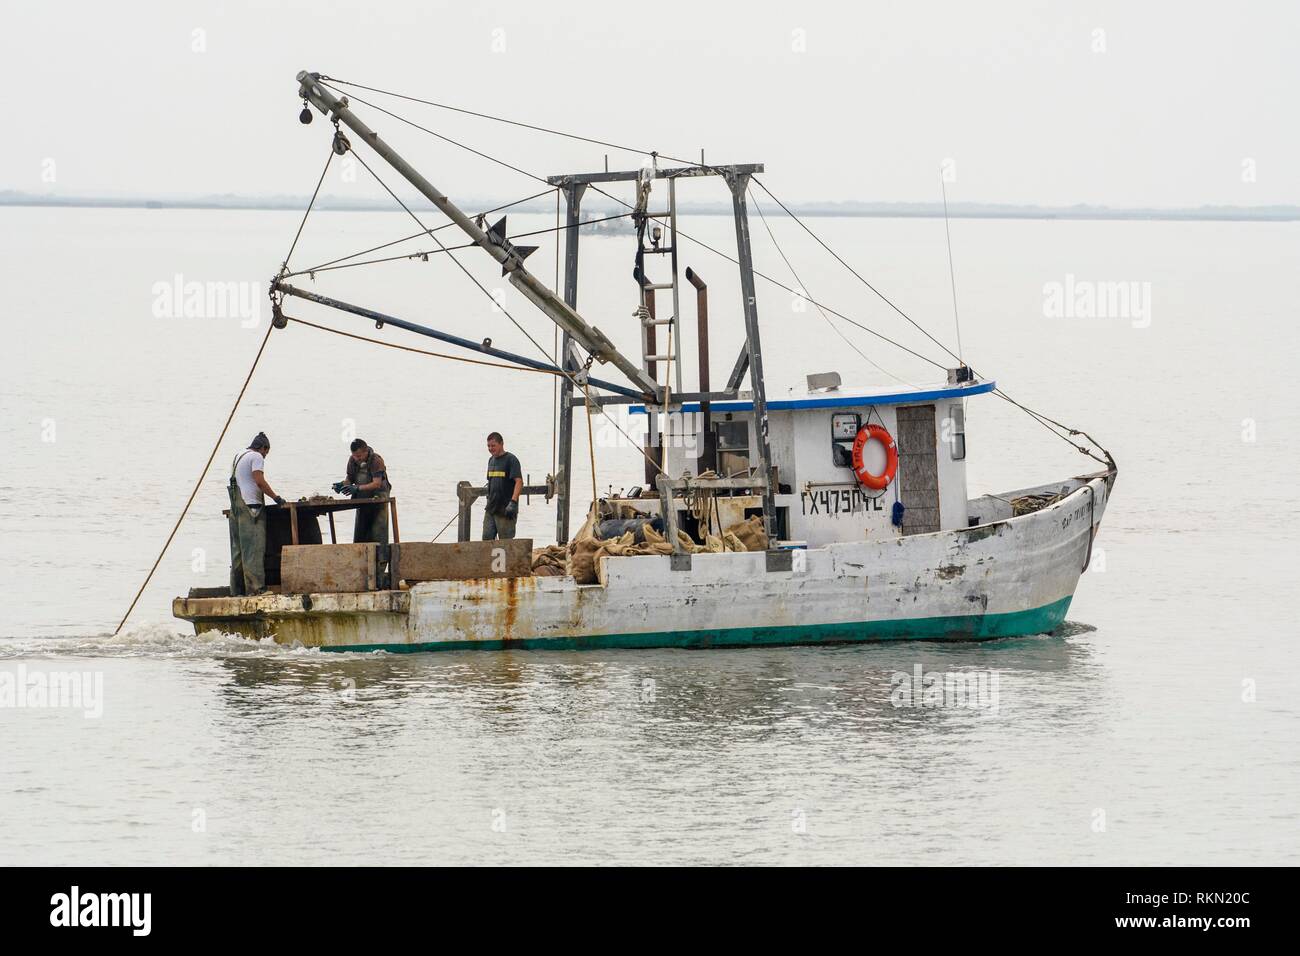 Workers sorting oysters on an oyster fishing boat in Aransas Bay, Rockport, Texas, USA. Stock Photo